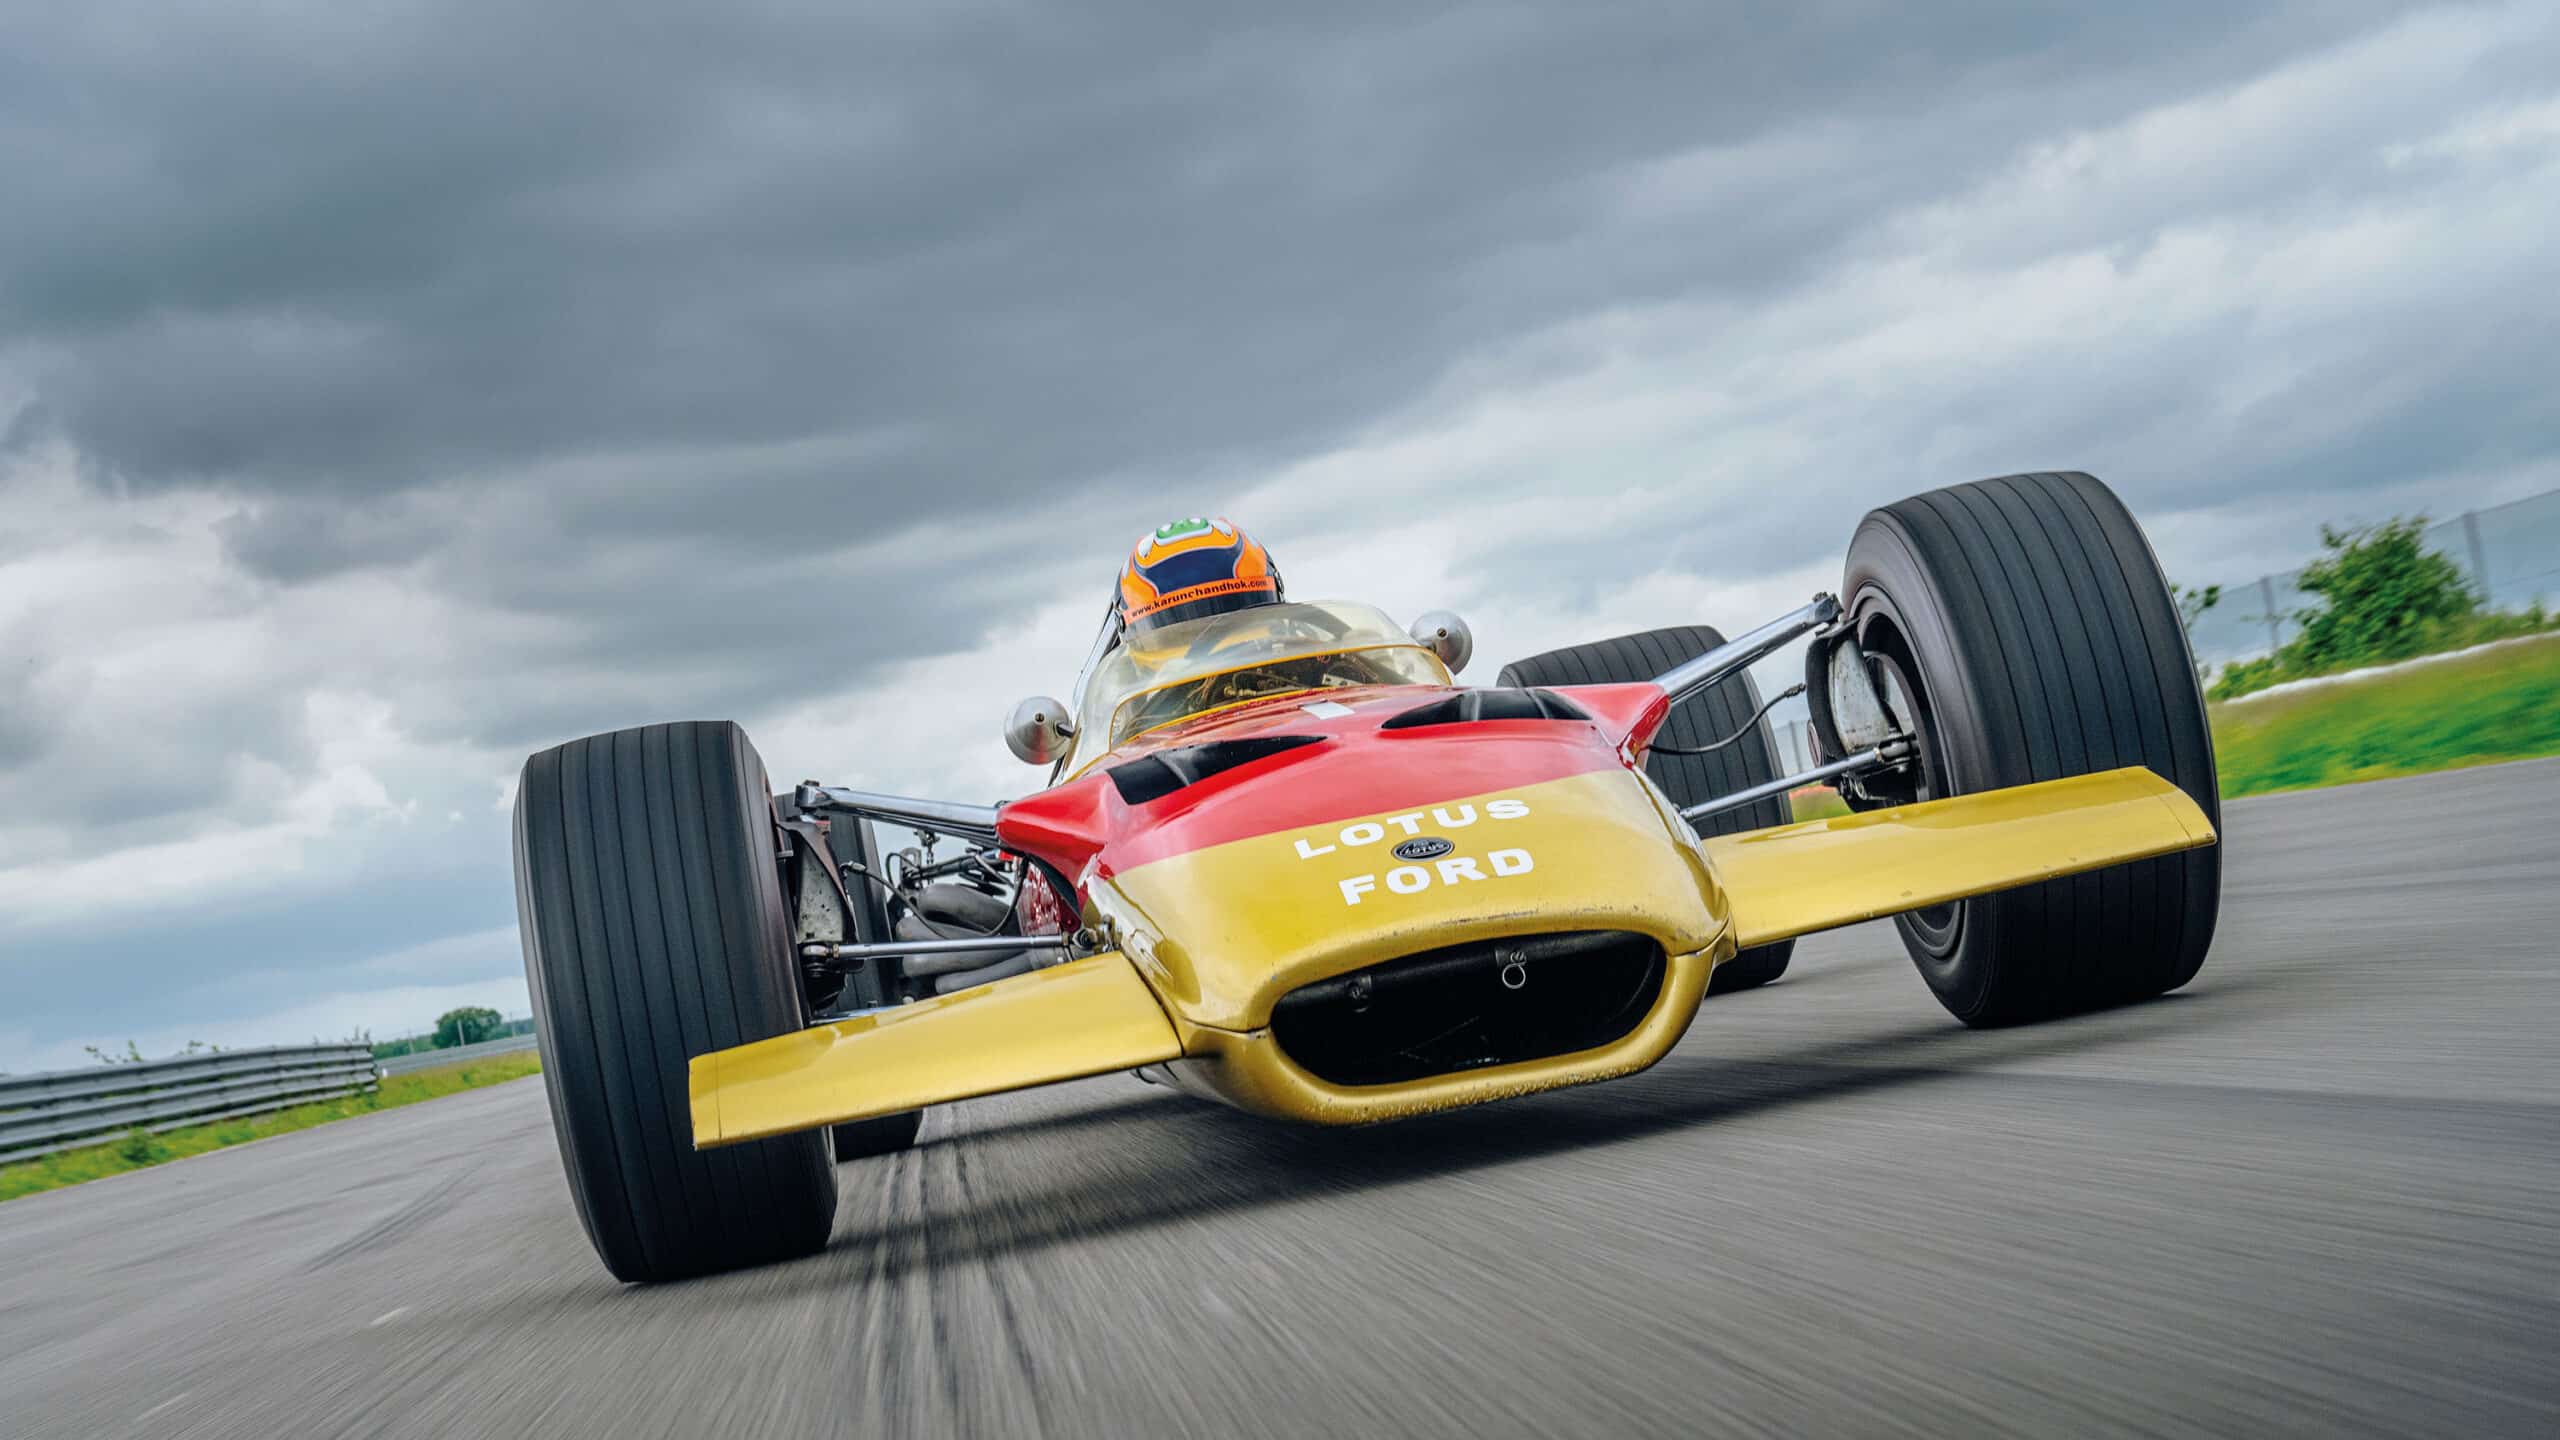 Lotus-49-on-track-with-Karun-Chandhok,-Race-car-of-the-century